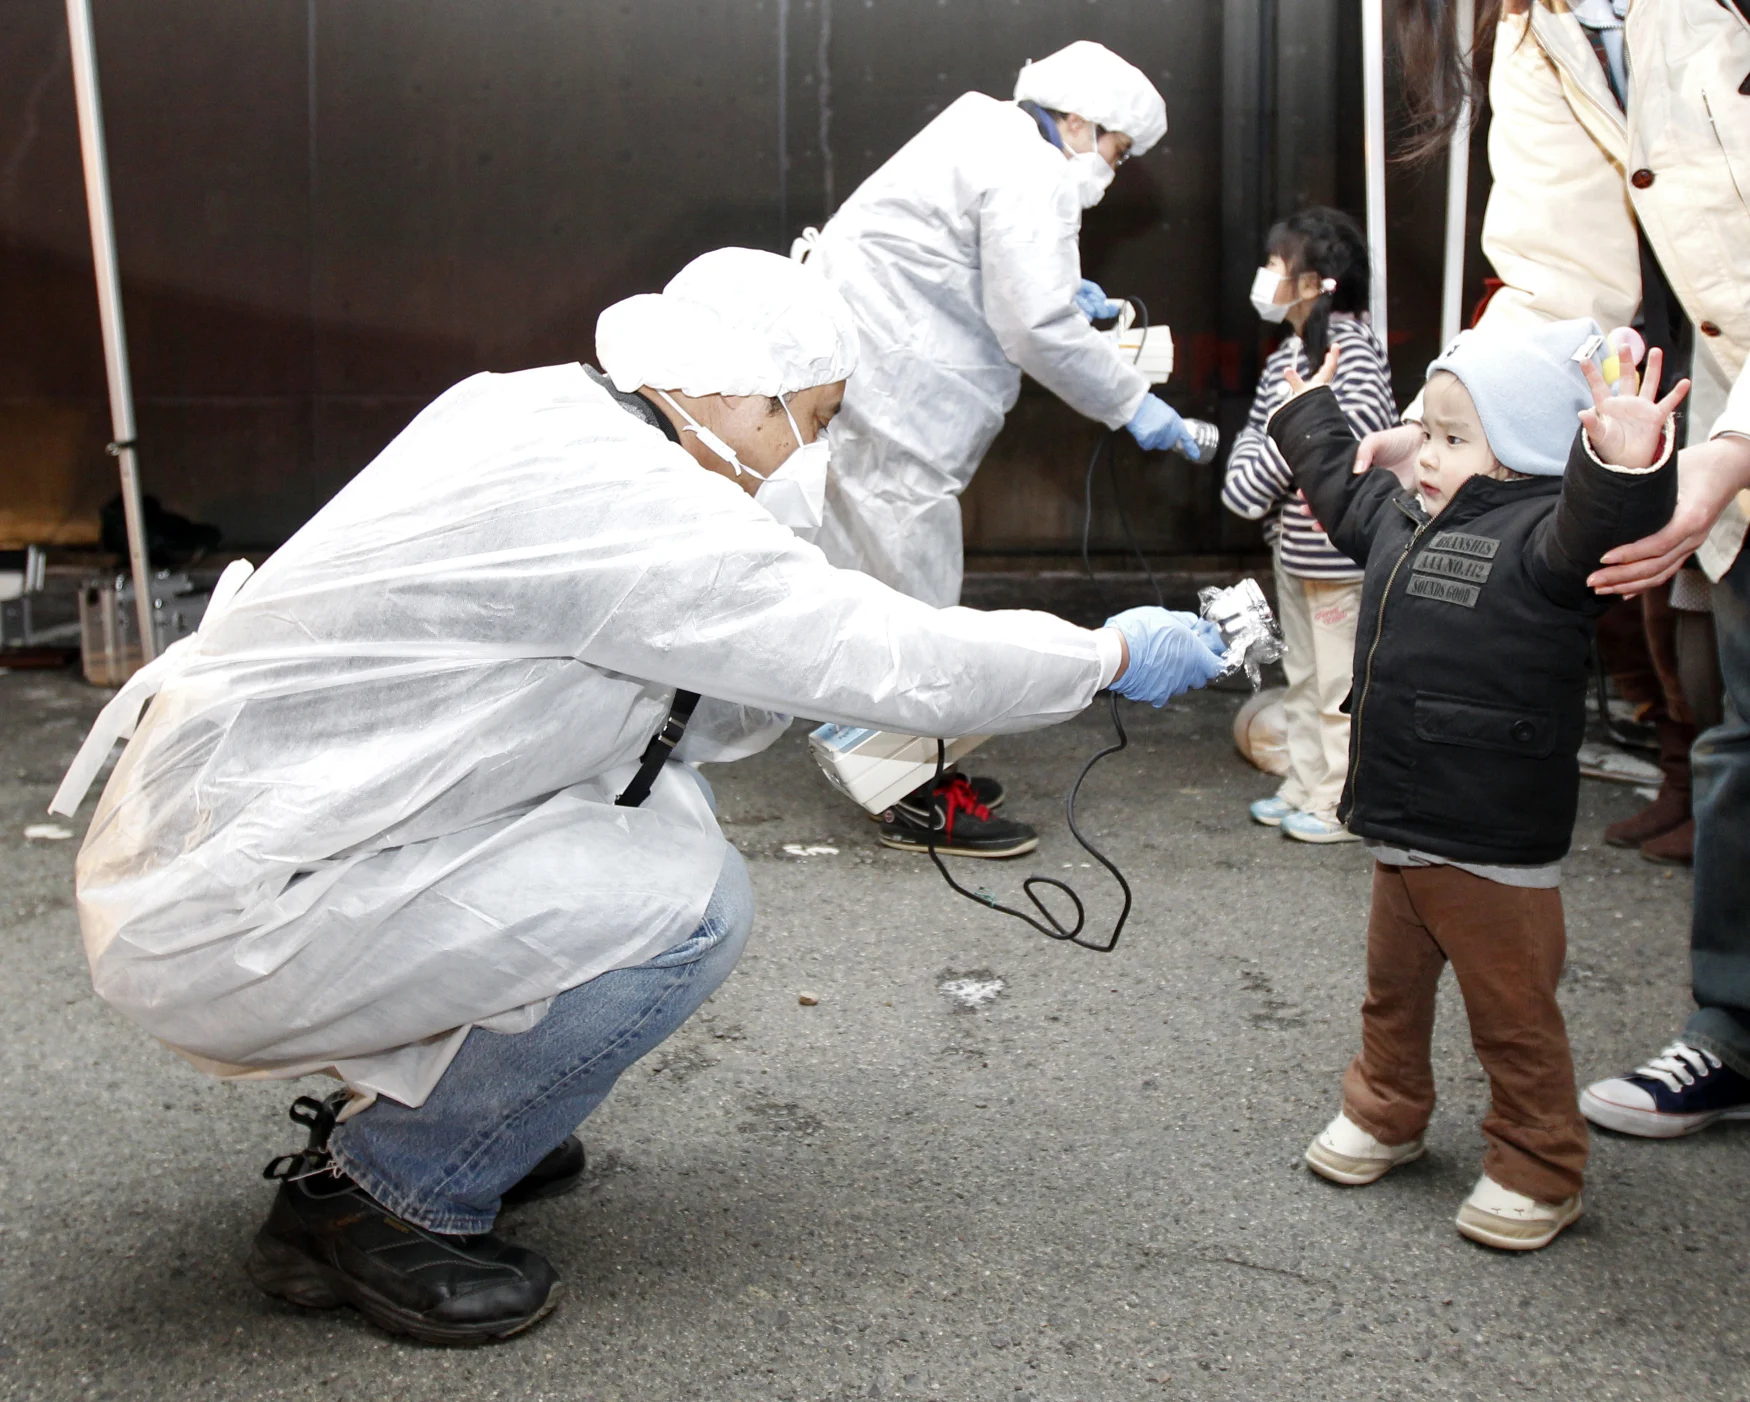 Officials in protective gear check for signs of radiation on children who are from the evacuation area near the Fukushima Daini nuclear plant in Koriyama, March 13, 2011. Japanese Chief Cabinet Secretary Yukio Edano confirmed on Saturday there has been an explosion and radiation leakage at Tokyo Electric Power Co's (TEPCO) Fukushima Daiichi nuclear power plant. The biggest earthquake to hit Japan on record struck the northeast coast on Friday, triggering a 10-metre tsunami that swept away everything in its path, including houses, ships, cars and farm buildings on fire.   REUTERS/Kim Kyung-Hoon (JAPAN - Tags: DISASTER ENVIRONMENT ENERGY IMAGES OF THE DAY)   FOR BEST QUALITY IMAGE: ALSO SEE GF2E88U0STU01.